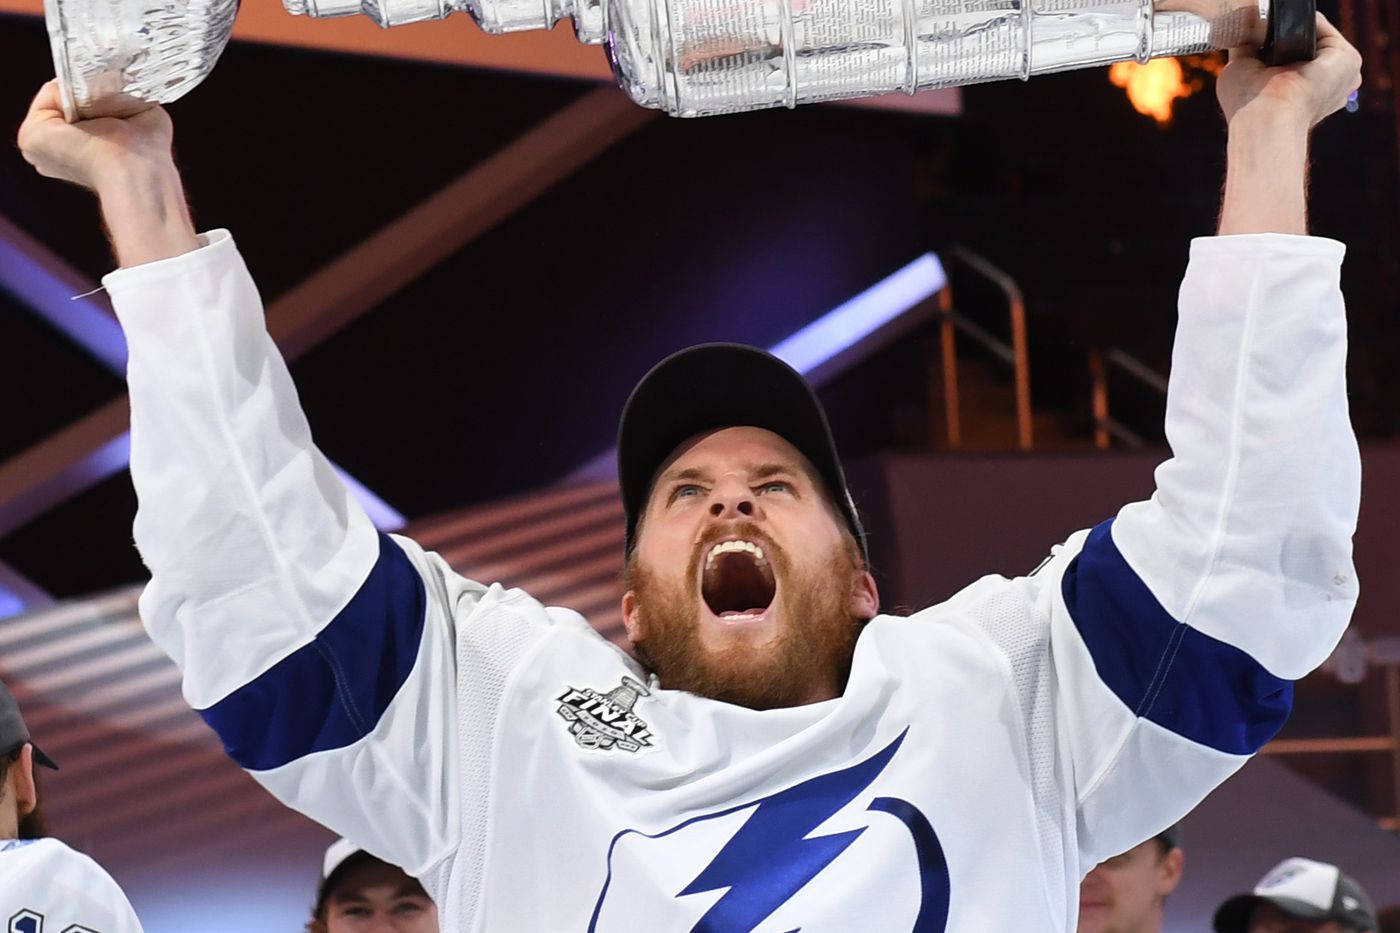 A third straight Lightning Stanley Cup isn't hard to imagine